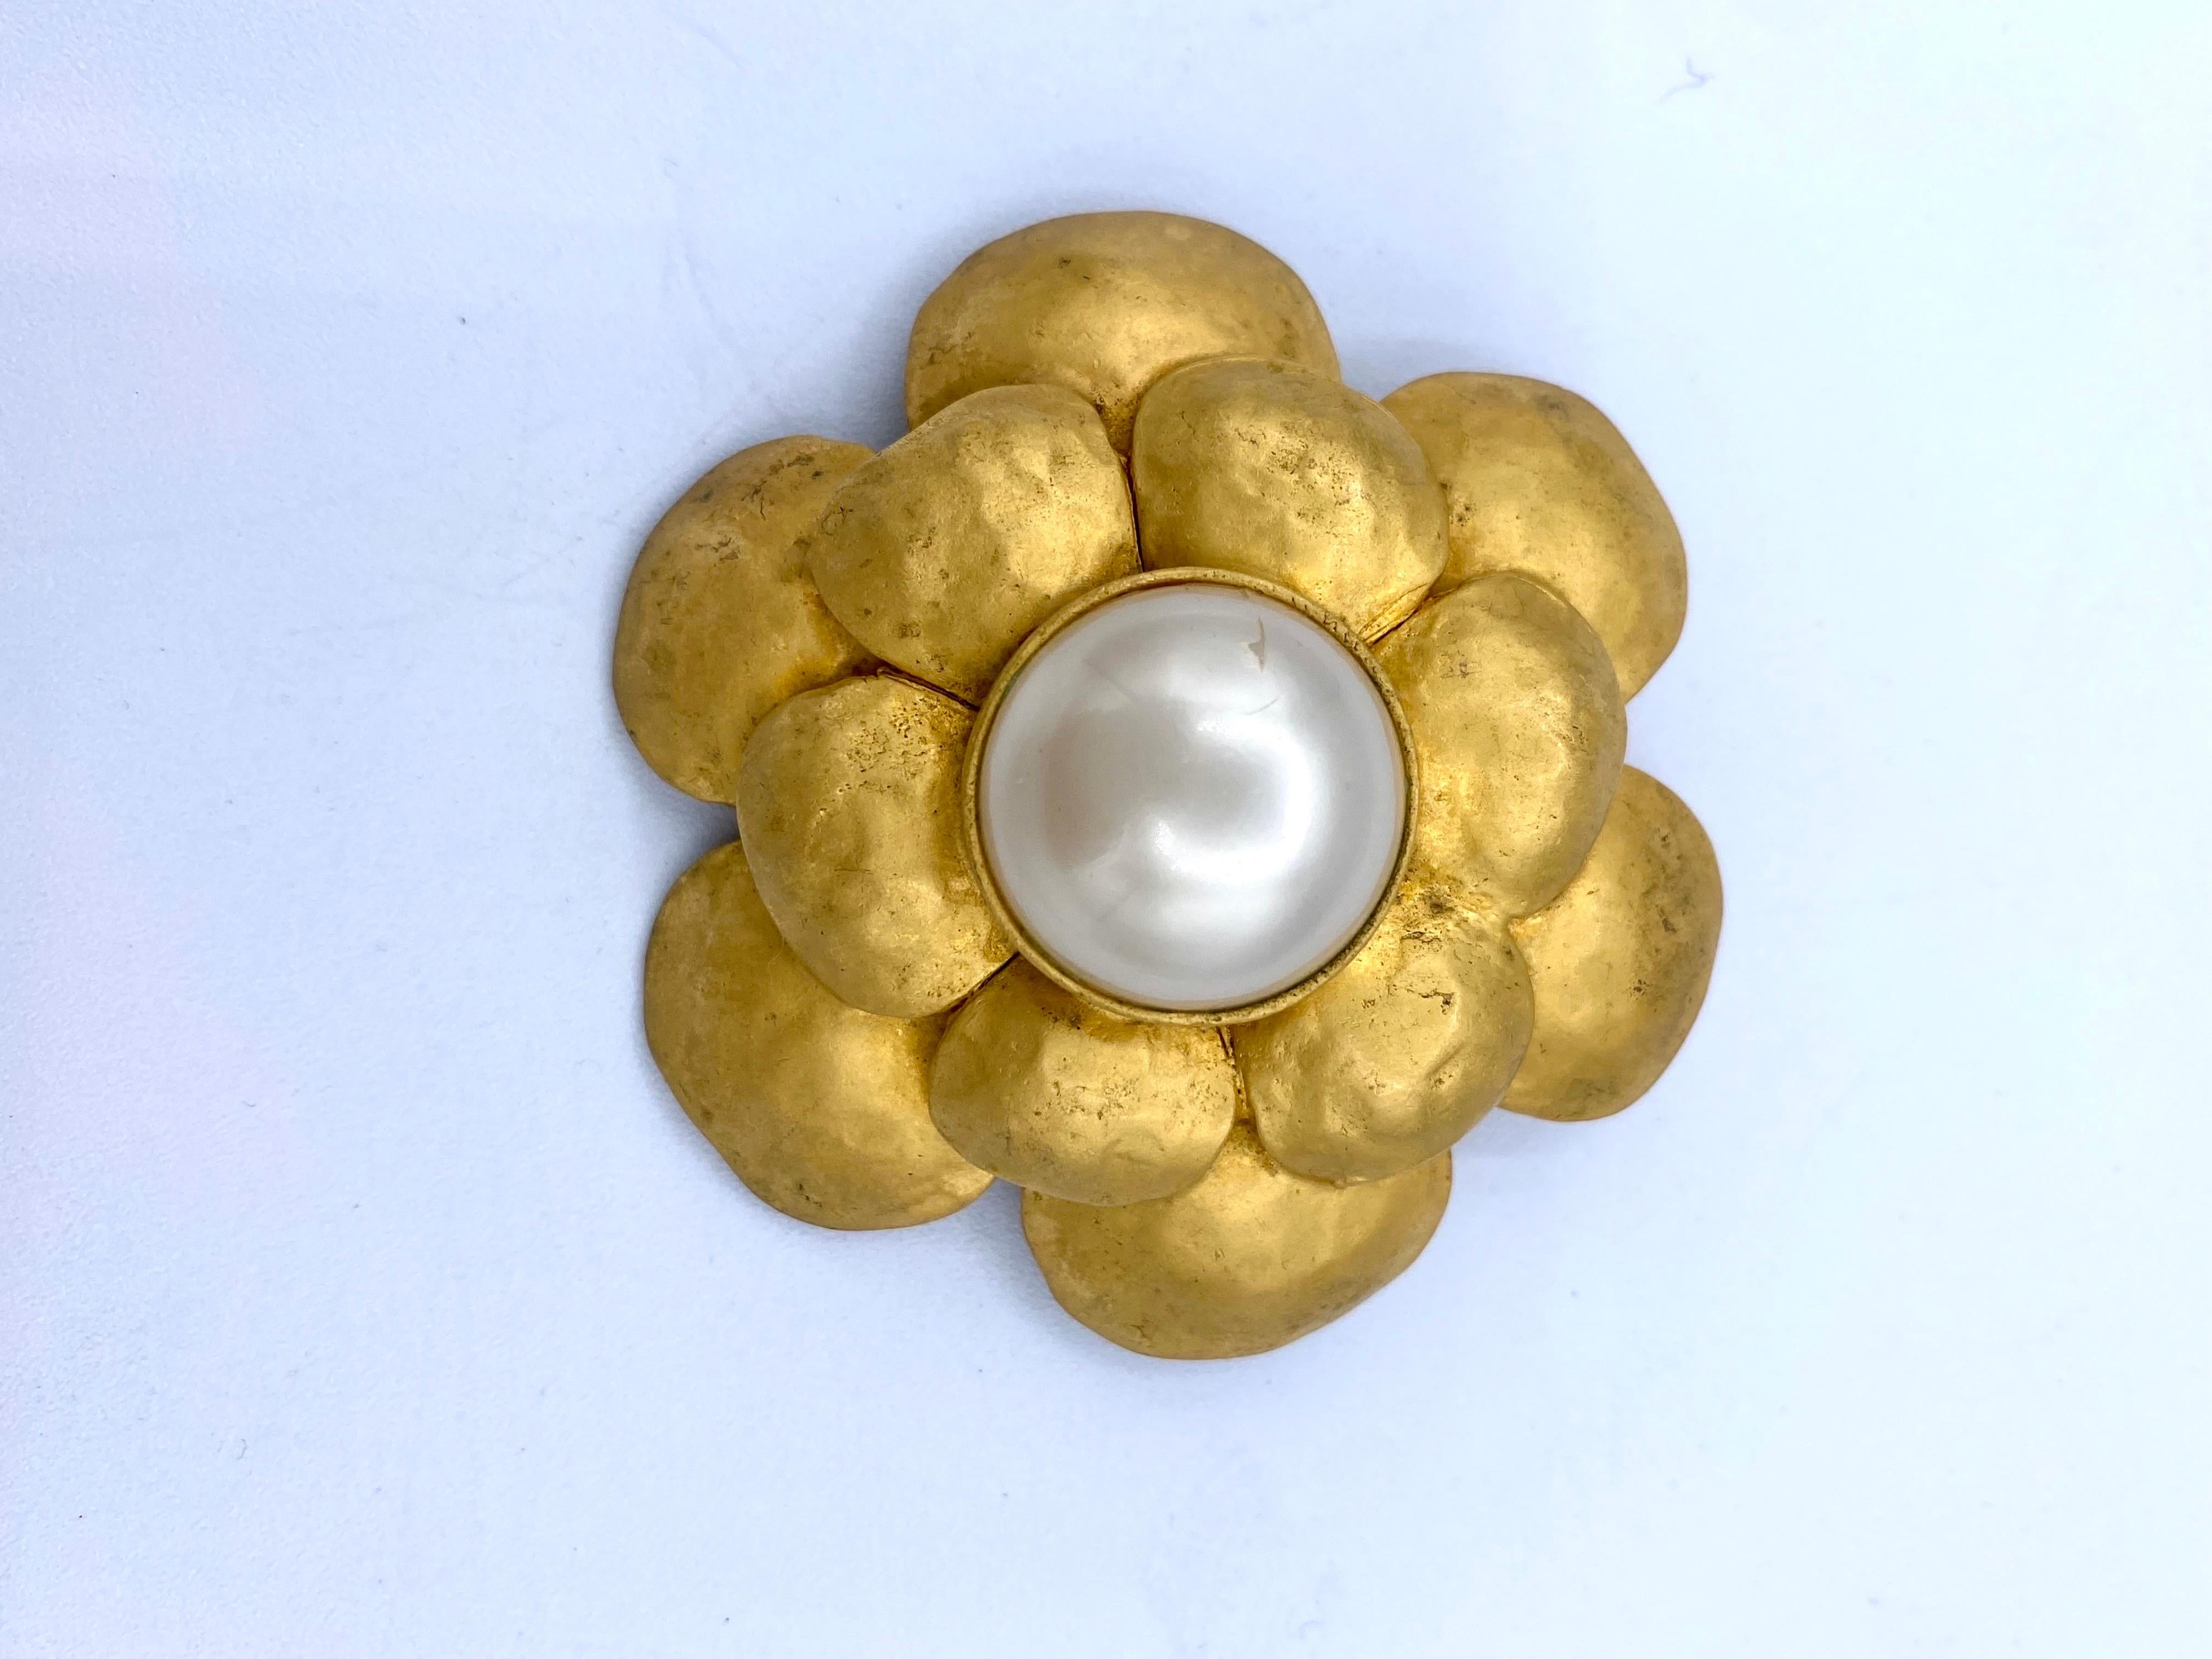 Vintage Chanel Camelia brooch in gold metal centered with a pearly cabochon from 1993.
Width 6cm
height 5.5cm
depth 2.7cm
The central cabochon is 2cm.
The brooch shows traces of use, verdigris on the back and a small mark on the cabochon, all